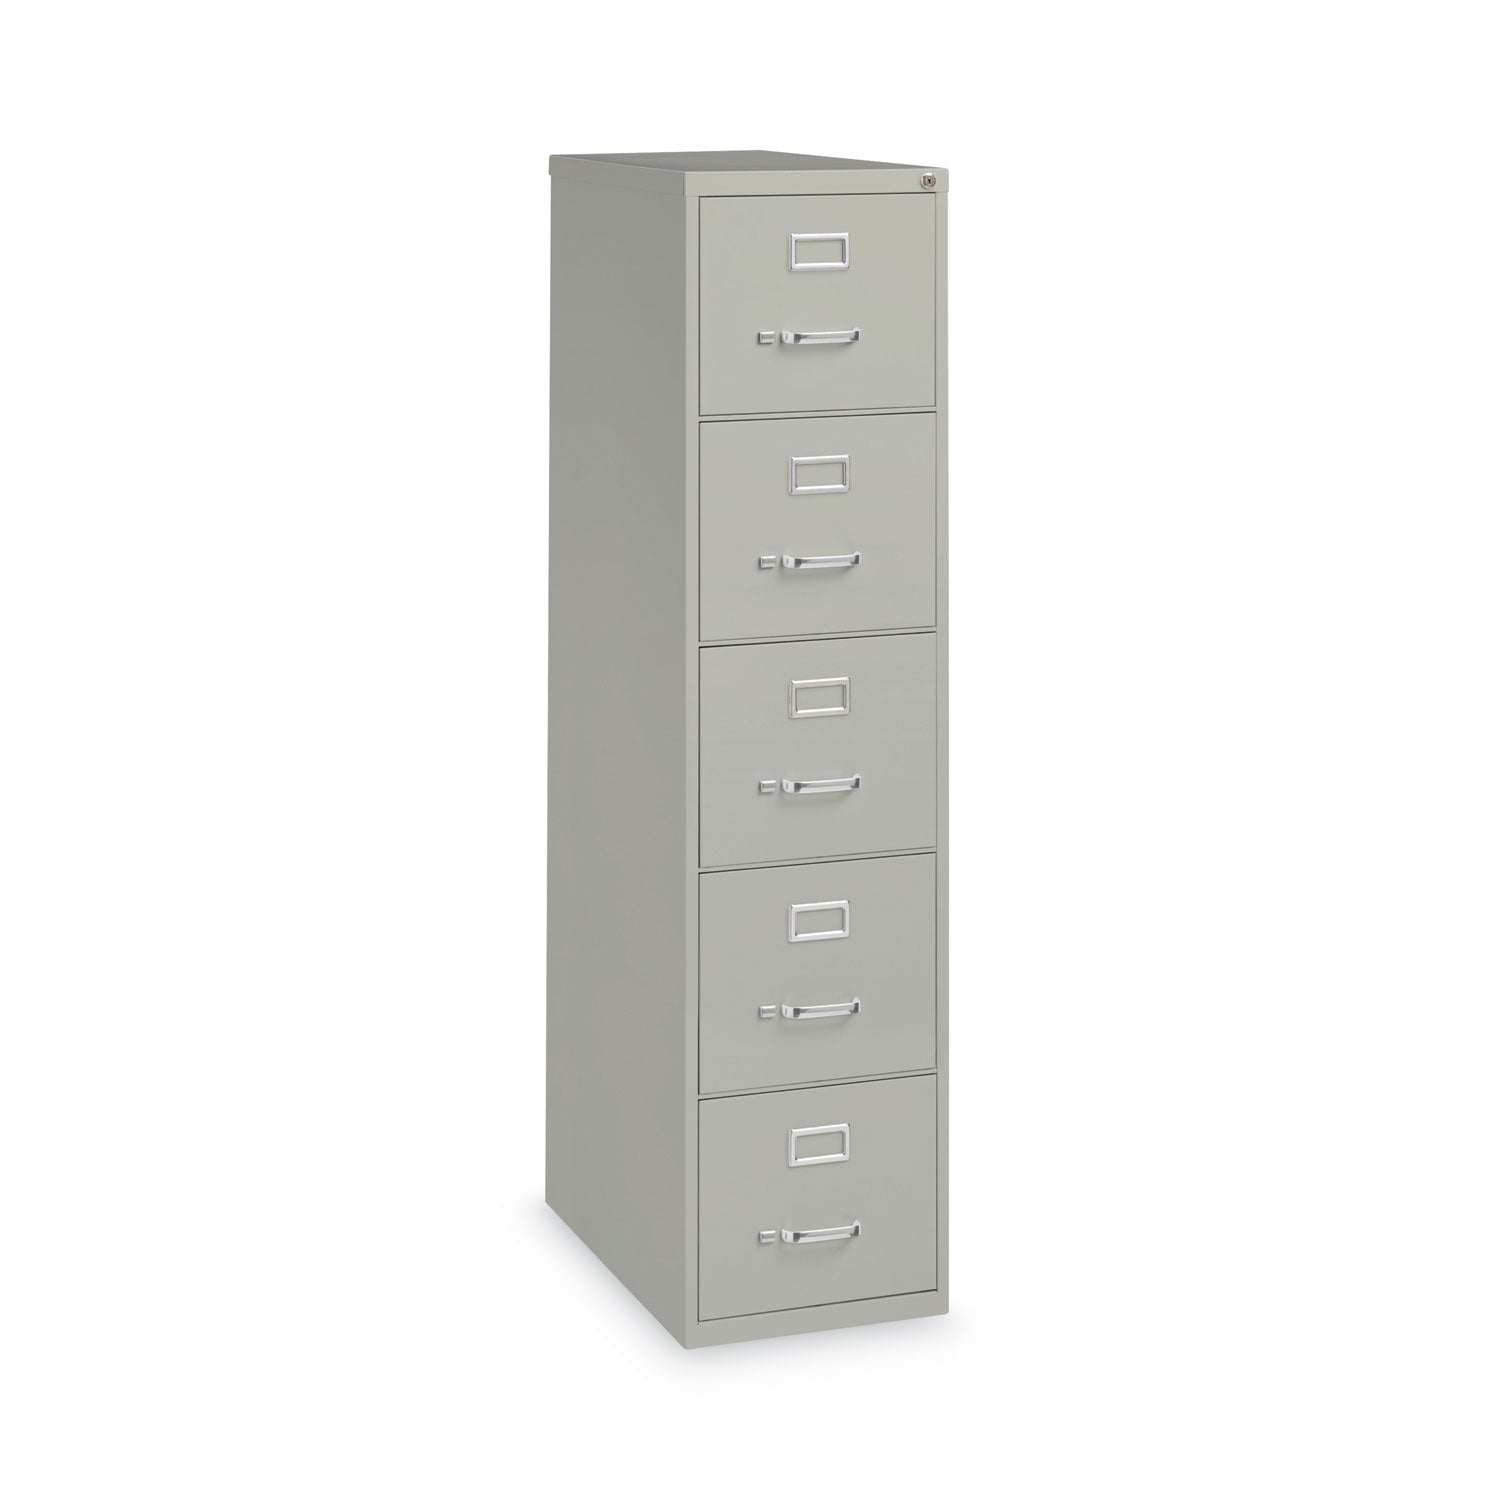 vertical-letter-file-cabinet-5-letter-size-file-drawers-light-gray-15-x-265-x-6137_hid17779 - 3